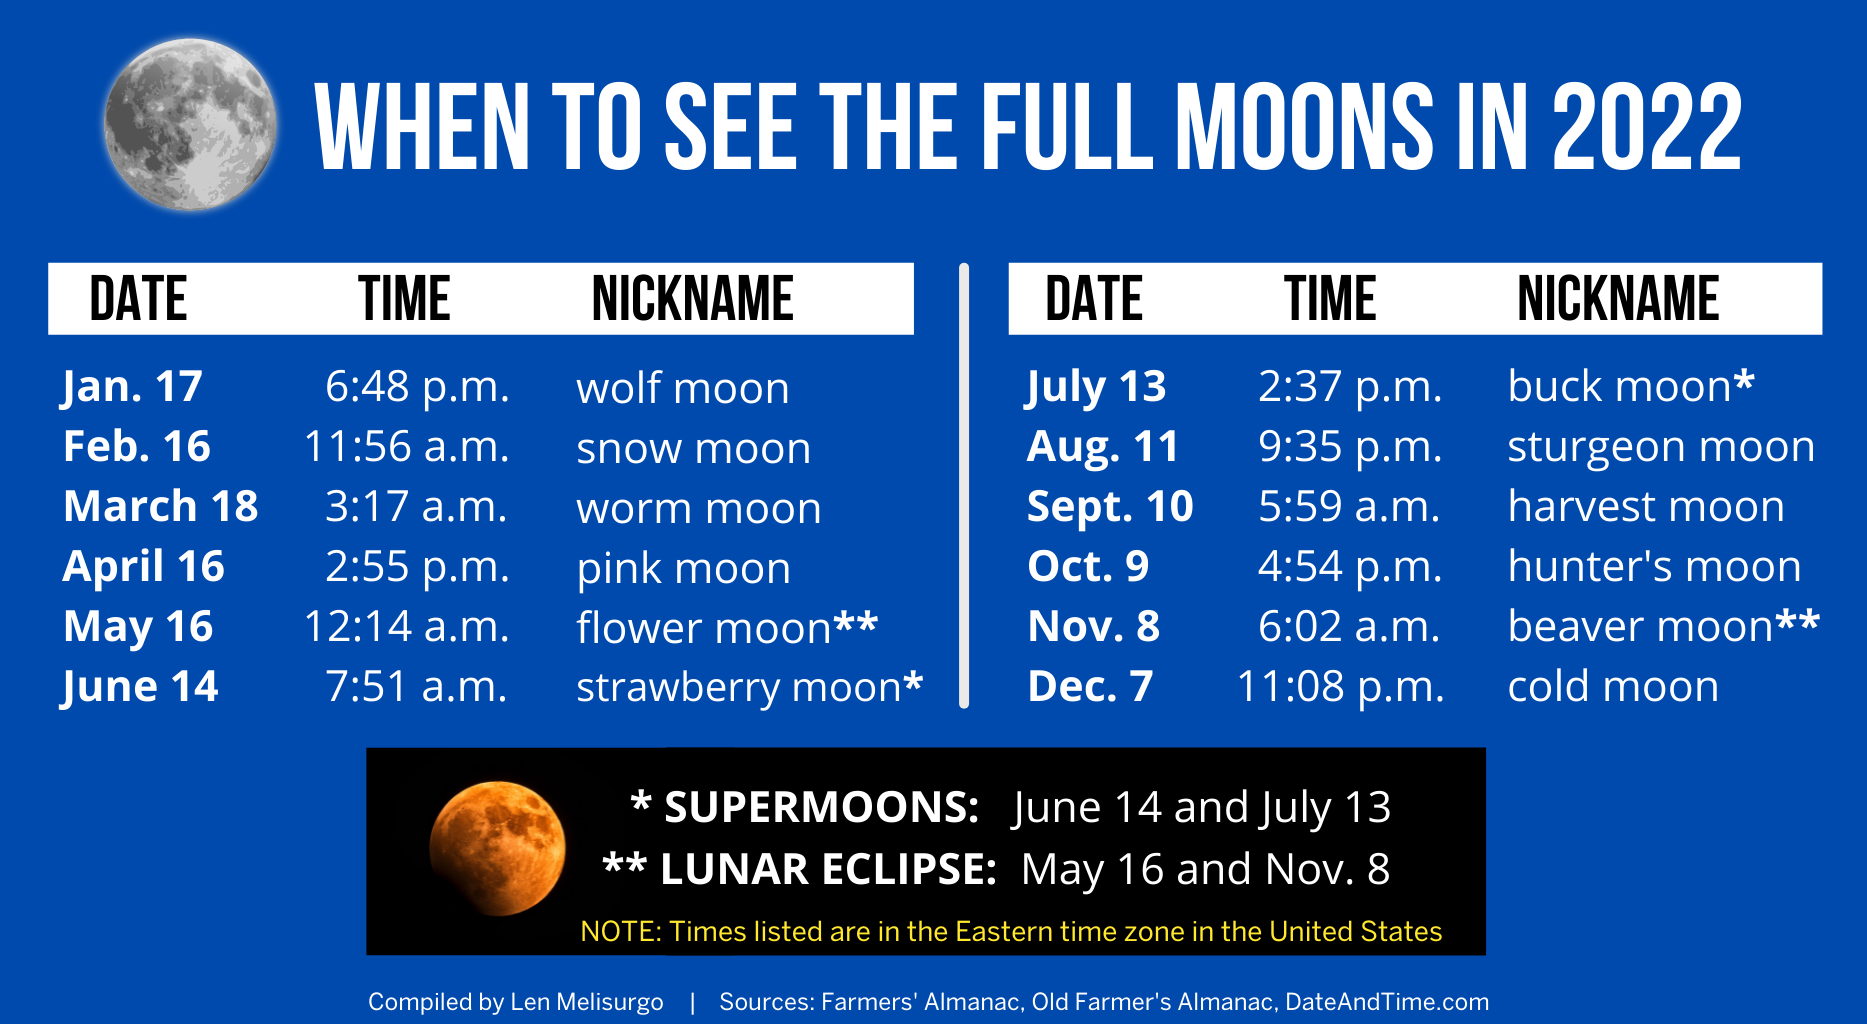 Lunar Eclipse Calendar 2022 The 12 Full Moons In 2022 Will Include 2 Supermoons, 2 Lunar Eclipses -  Nj.com